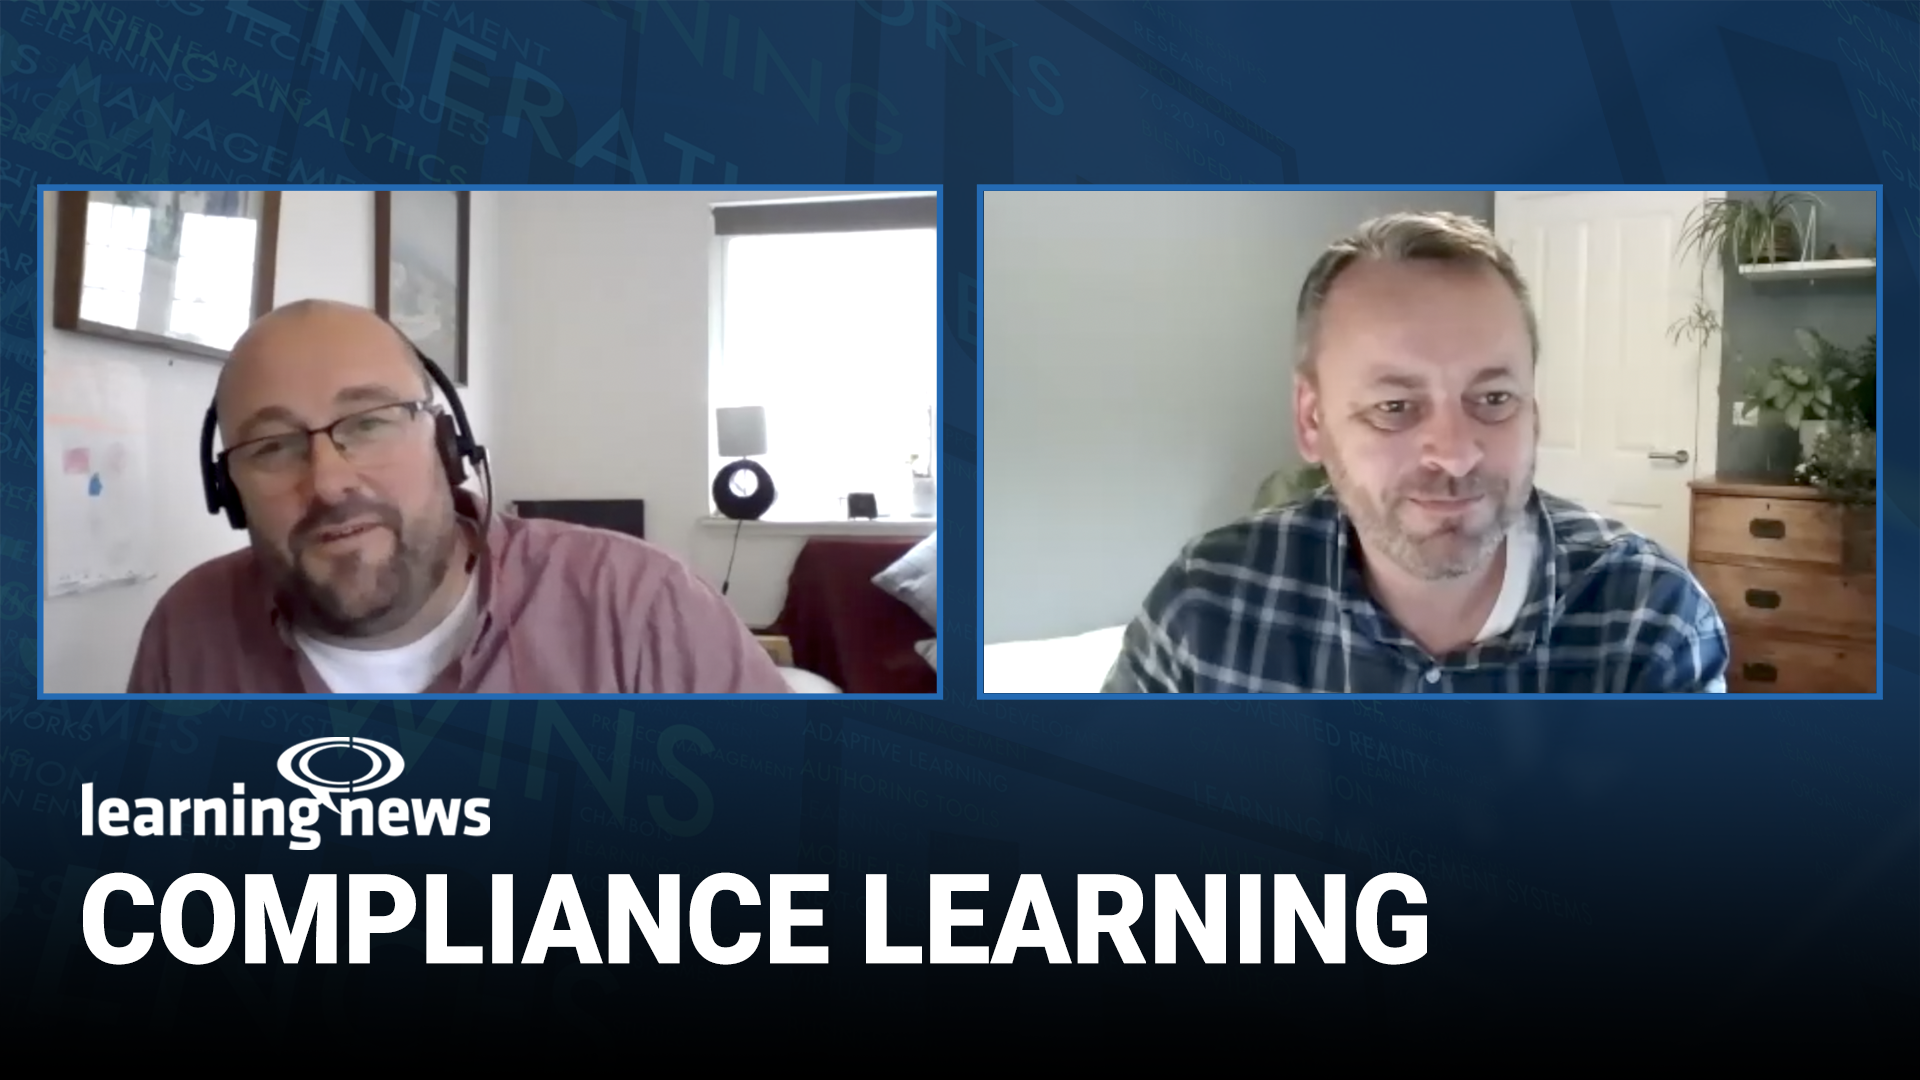 Andy Costello and Rory Lawson from Kineo join Learning News to discuss compliance training